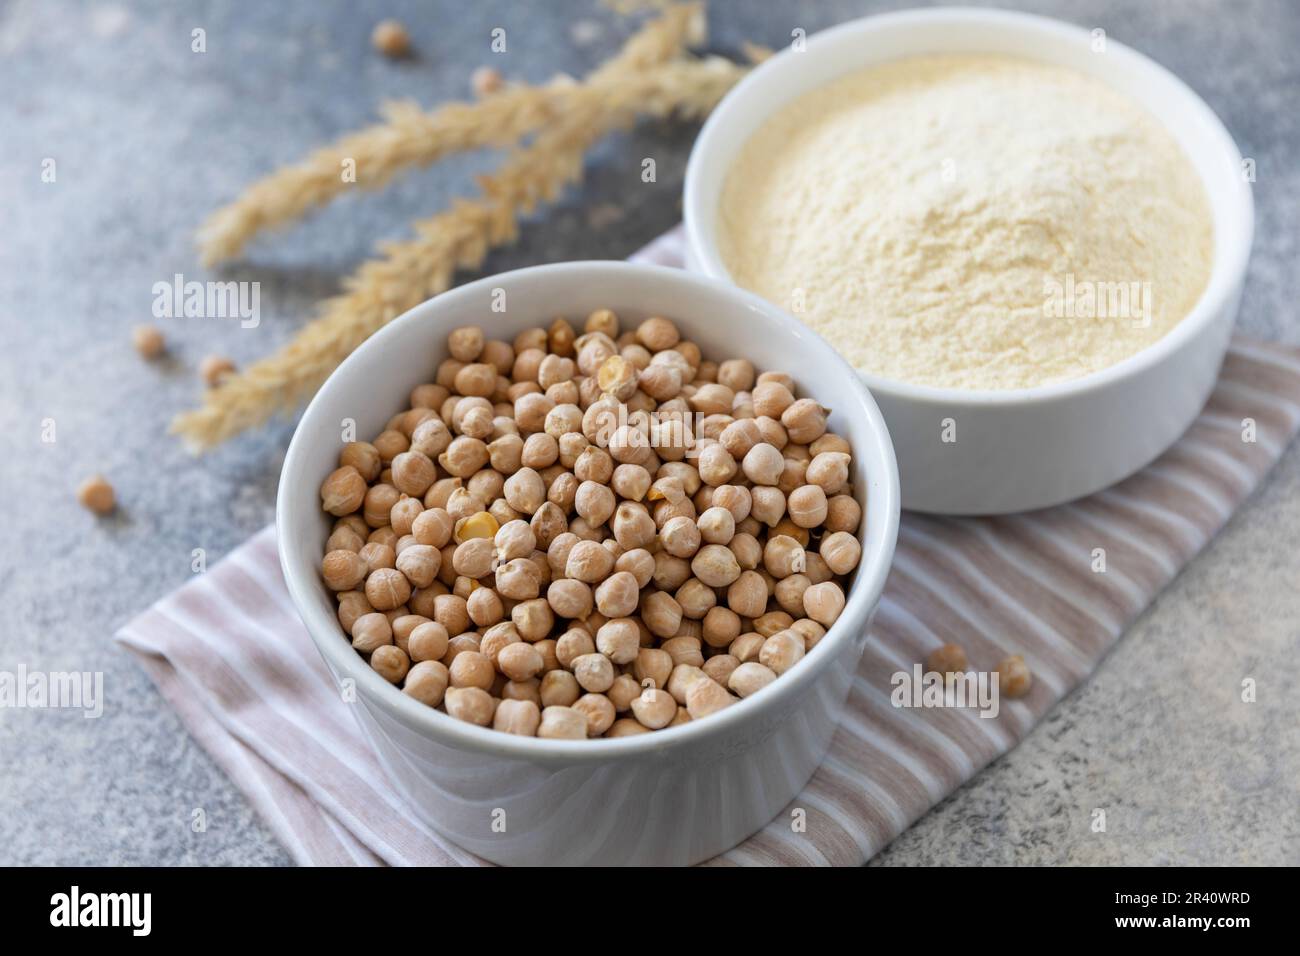 Food and baking gluten-free protein ingredient. Chickpea flour wholesome and raw chickpea over gray stone table. Stock Photo